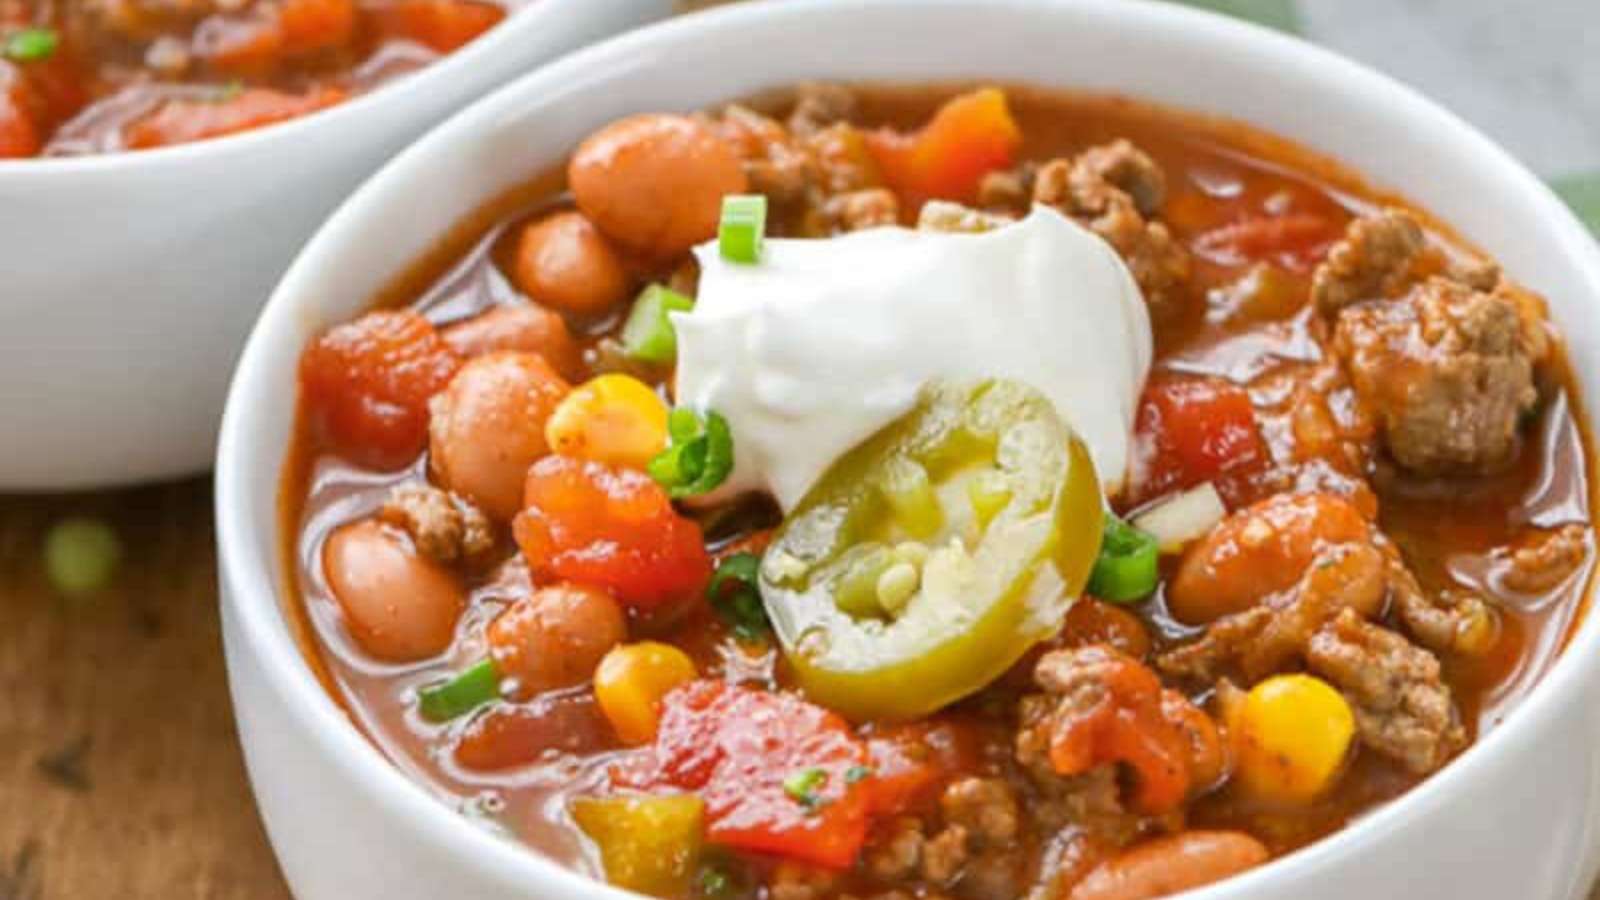 Two bowls of chili with beans, corn and sour cream.